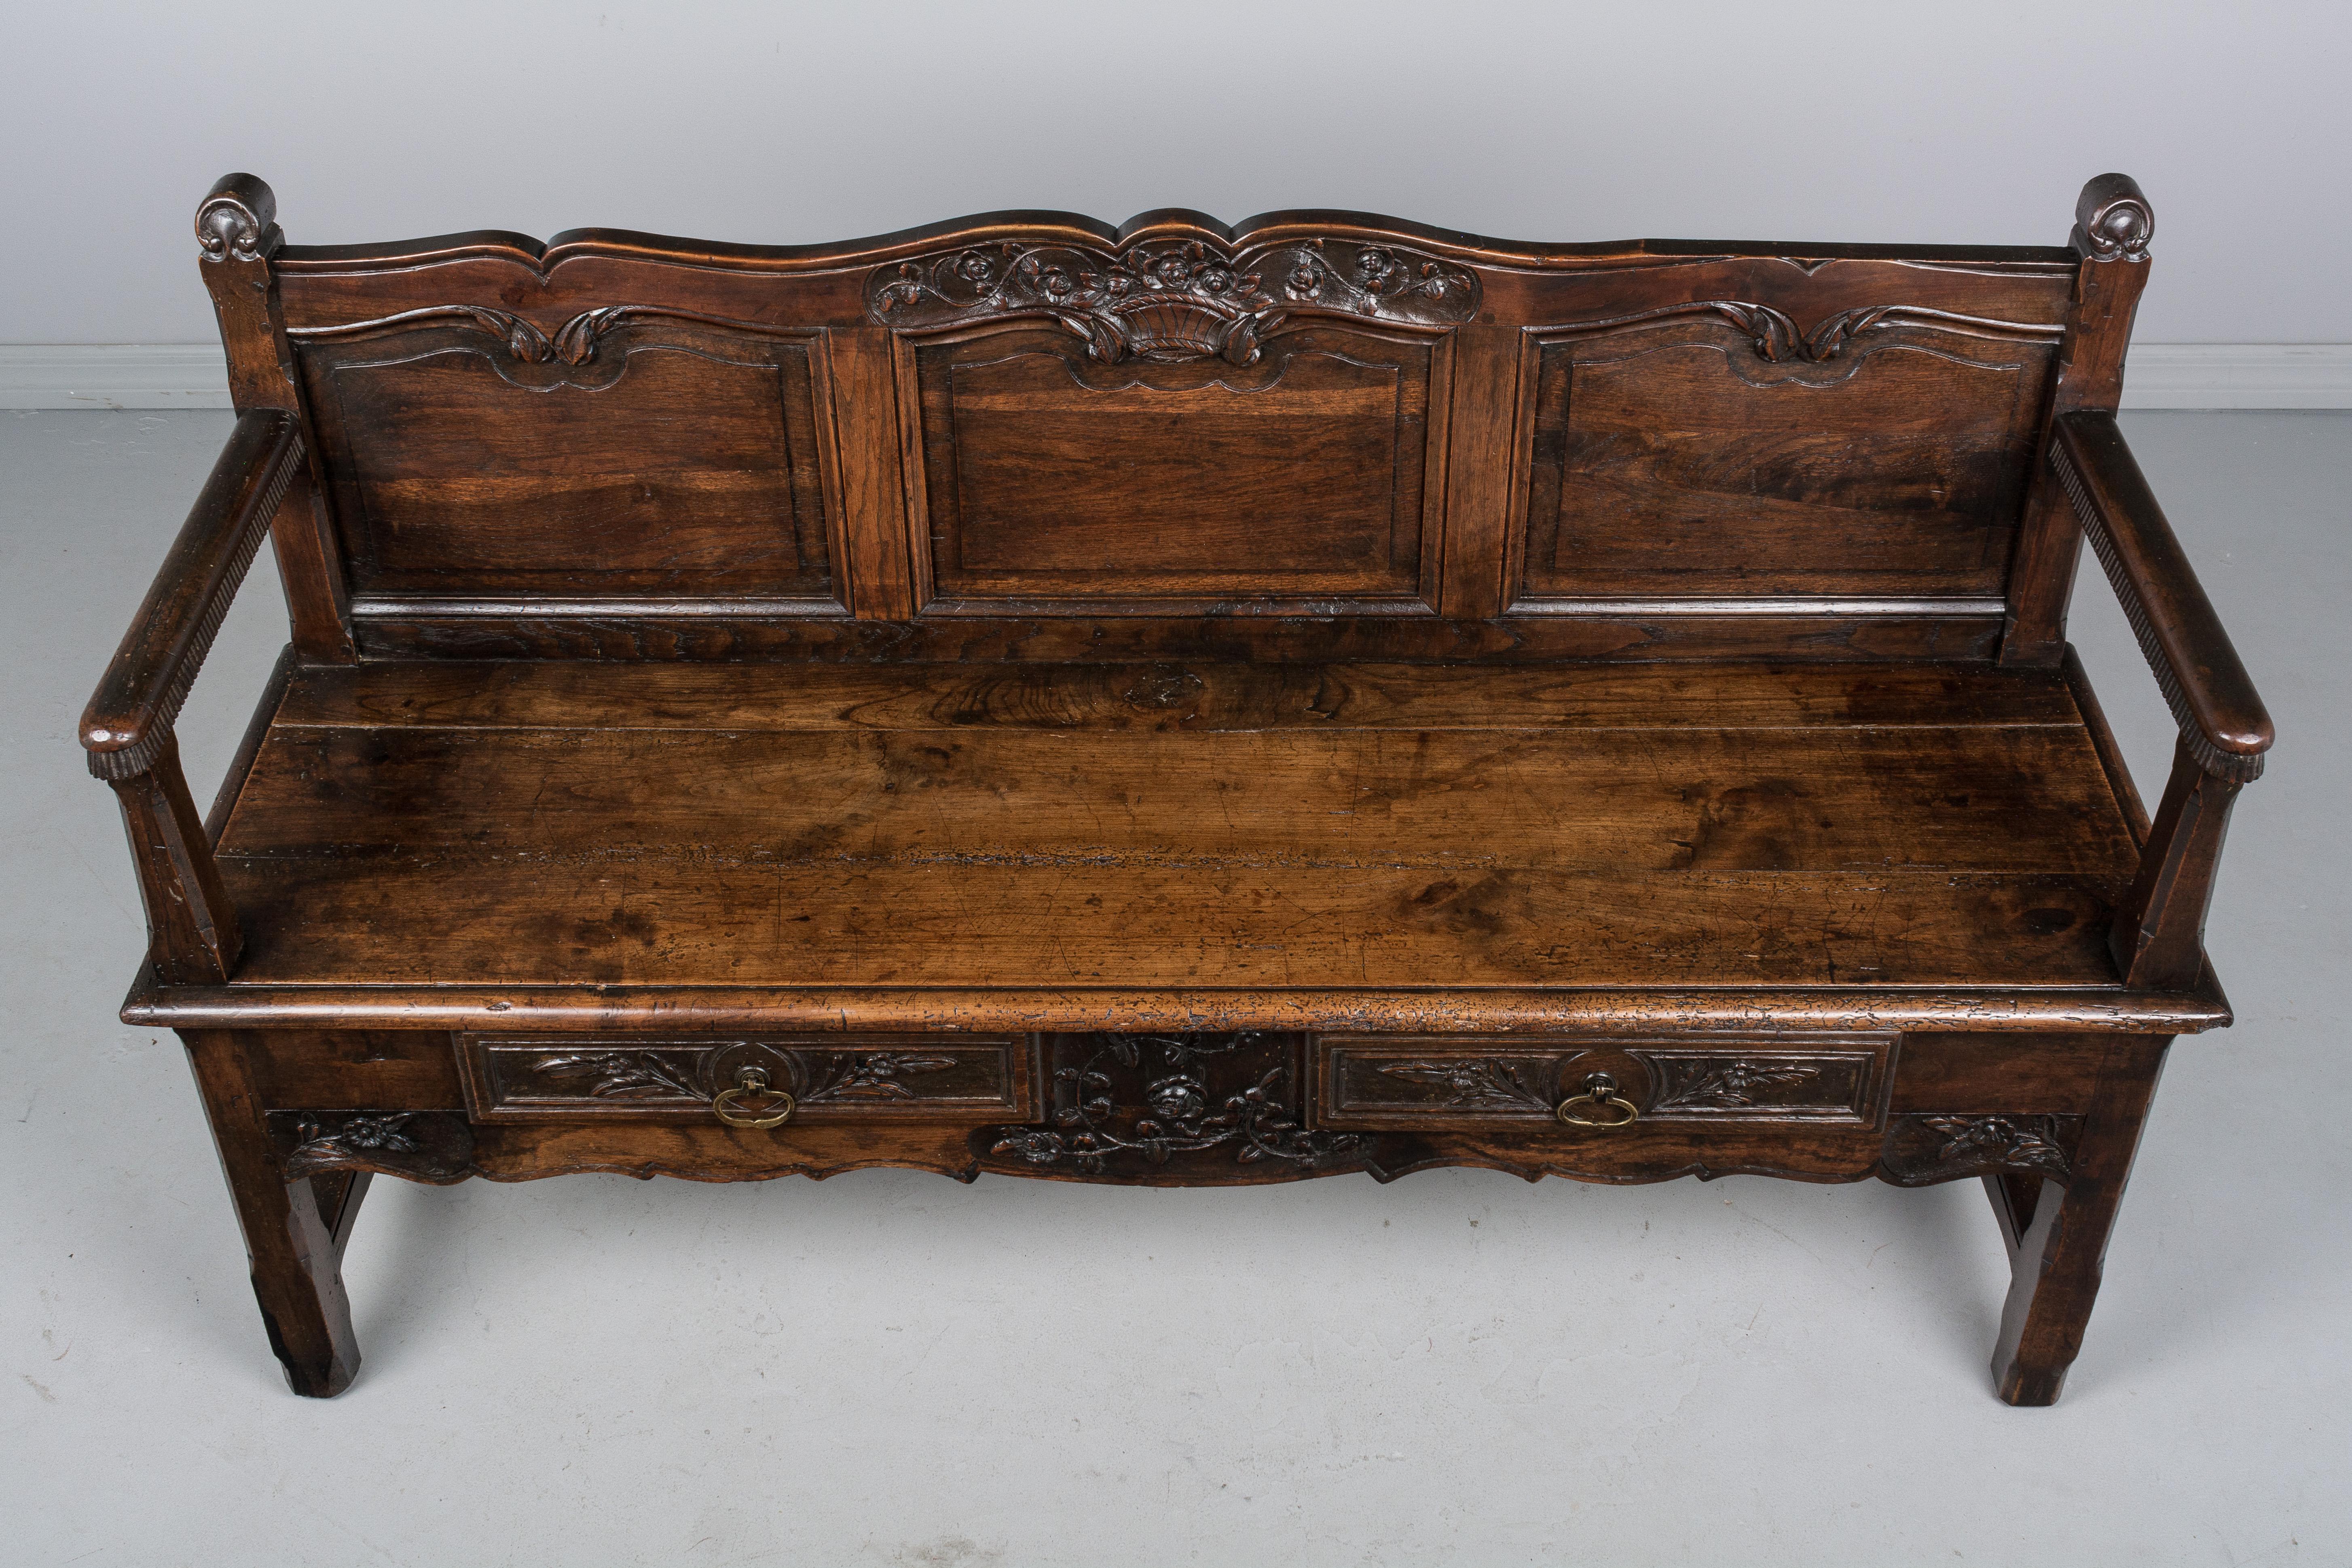 Hand-Carved Early 19th Century French Provencal Bench